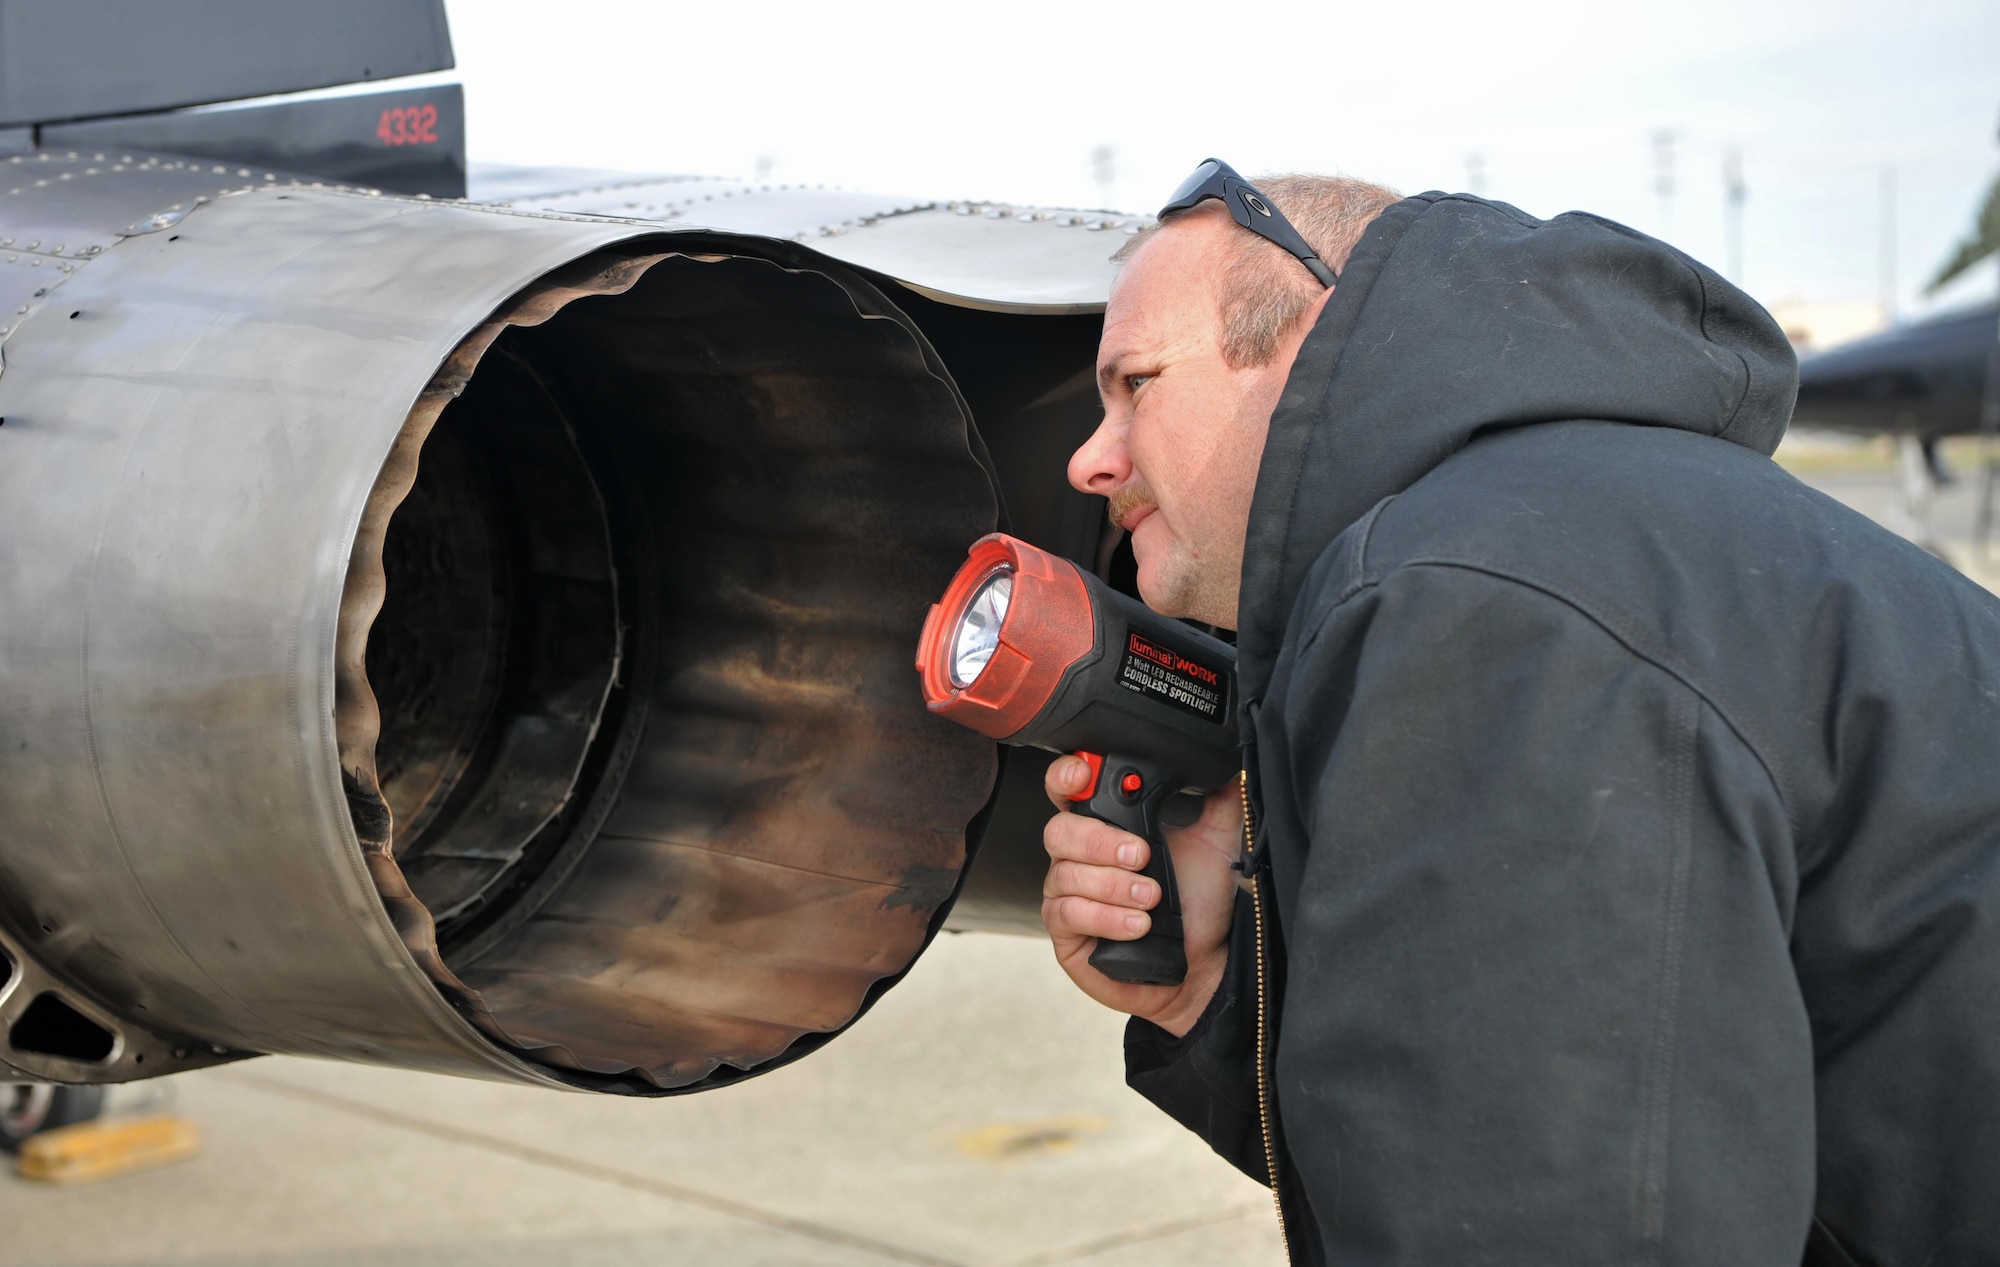 Matt Miller, 9th Maintenance Group T-38 aircraft mechanic, checks for cracks in a T-38 Talon’s exhaust during a post-flight inspection Dec. 5, 2016, at Beale Air Force Base, California. The exhaust will form cracks from expansion and contraction due to repeated heated and cooling. (U.S. Air Force Photo/Airman Tristan D. Viglianco)